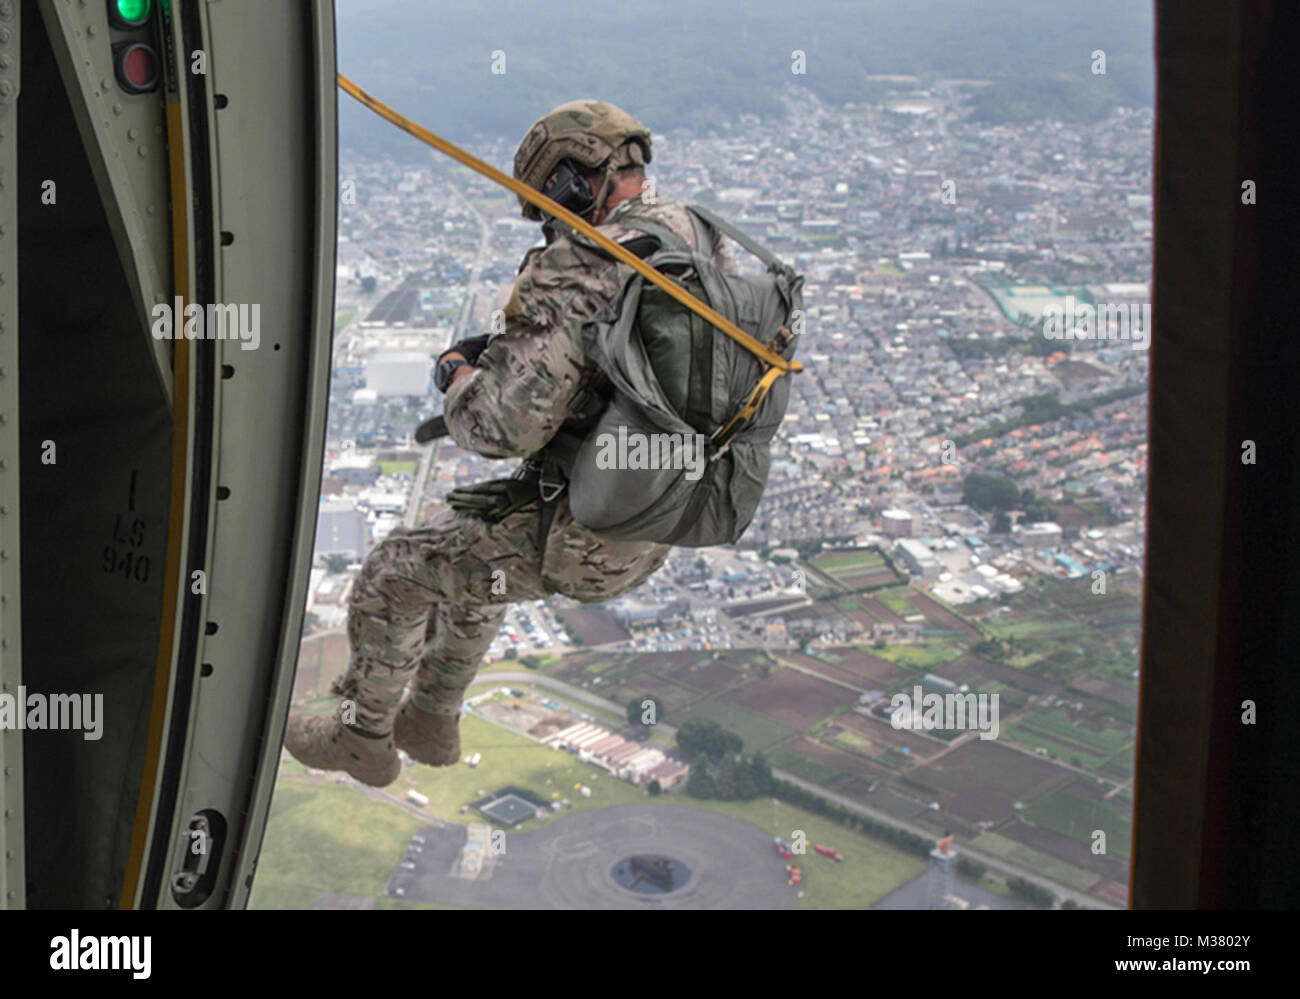 Tech. Sgt. Seth Sarrett, 374th Operations Support Squadron survival, evasion, resistance and escape specialist, jumps out of a C-130J Super Hercules during a training mission over Yokota Air Base, Japan, July 28, 2017. The Training not only allowed the SERE to practice jumping, but it also allowed the Yokota aircrews to practice personnel drops and maintaining their qualifications. (U.S. Air Force photo by Yasuo Osakabe) Airmen conduct SERE training aboard Yokota Air Base by #PACOM Stock Photo